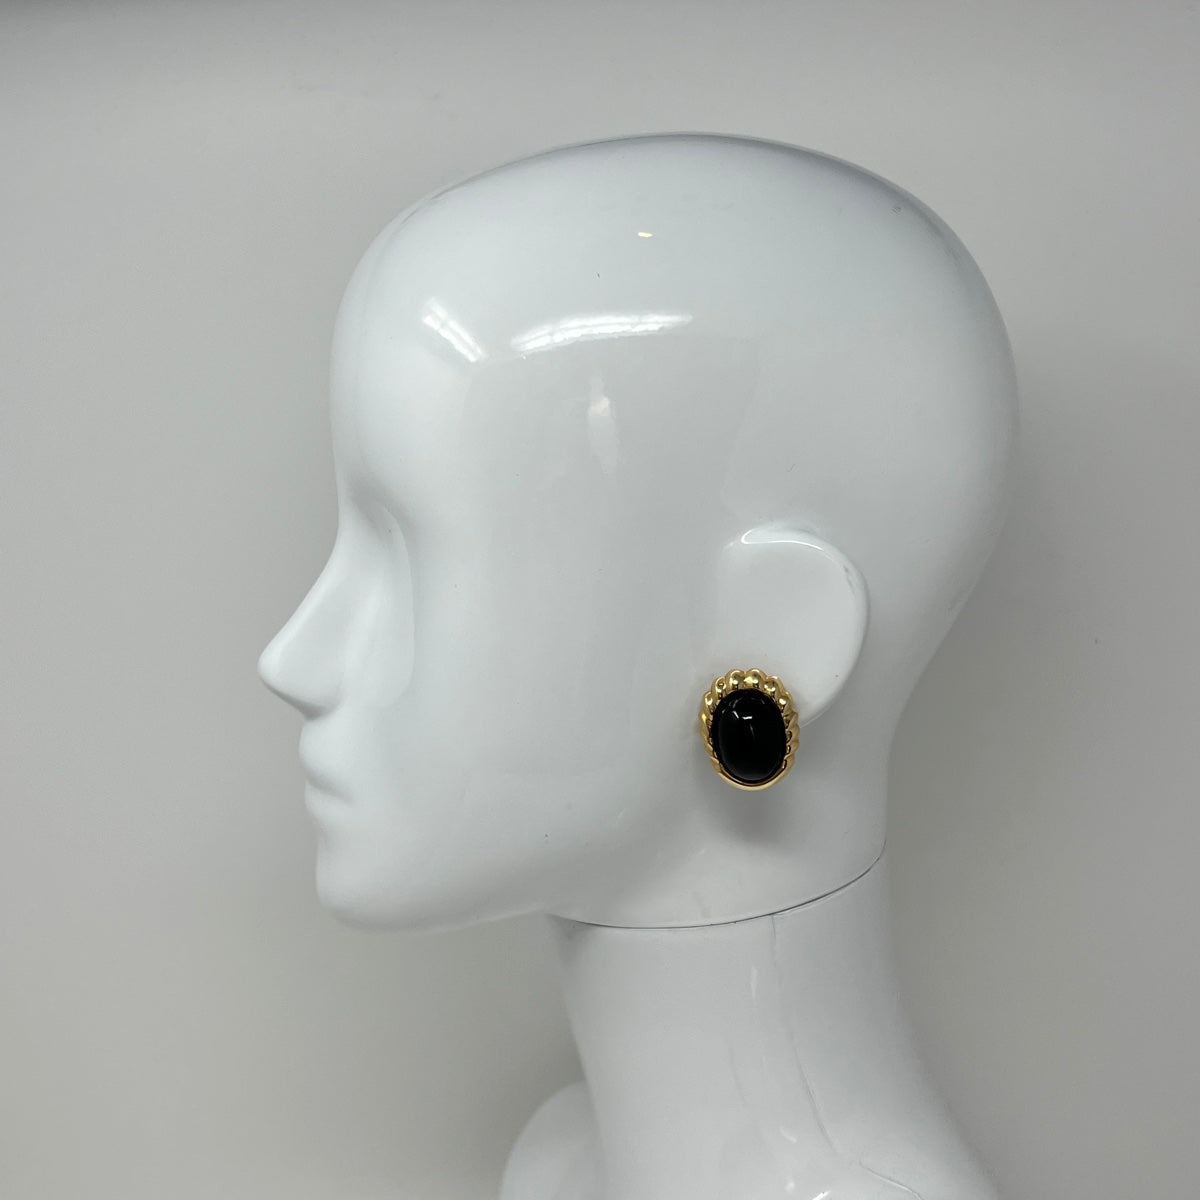 Rudolph Friedman 14K Gold Earclip with Oval Onyx Cabochon